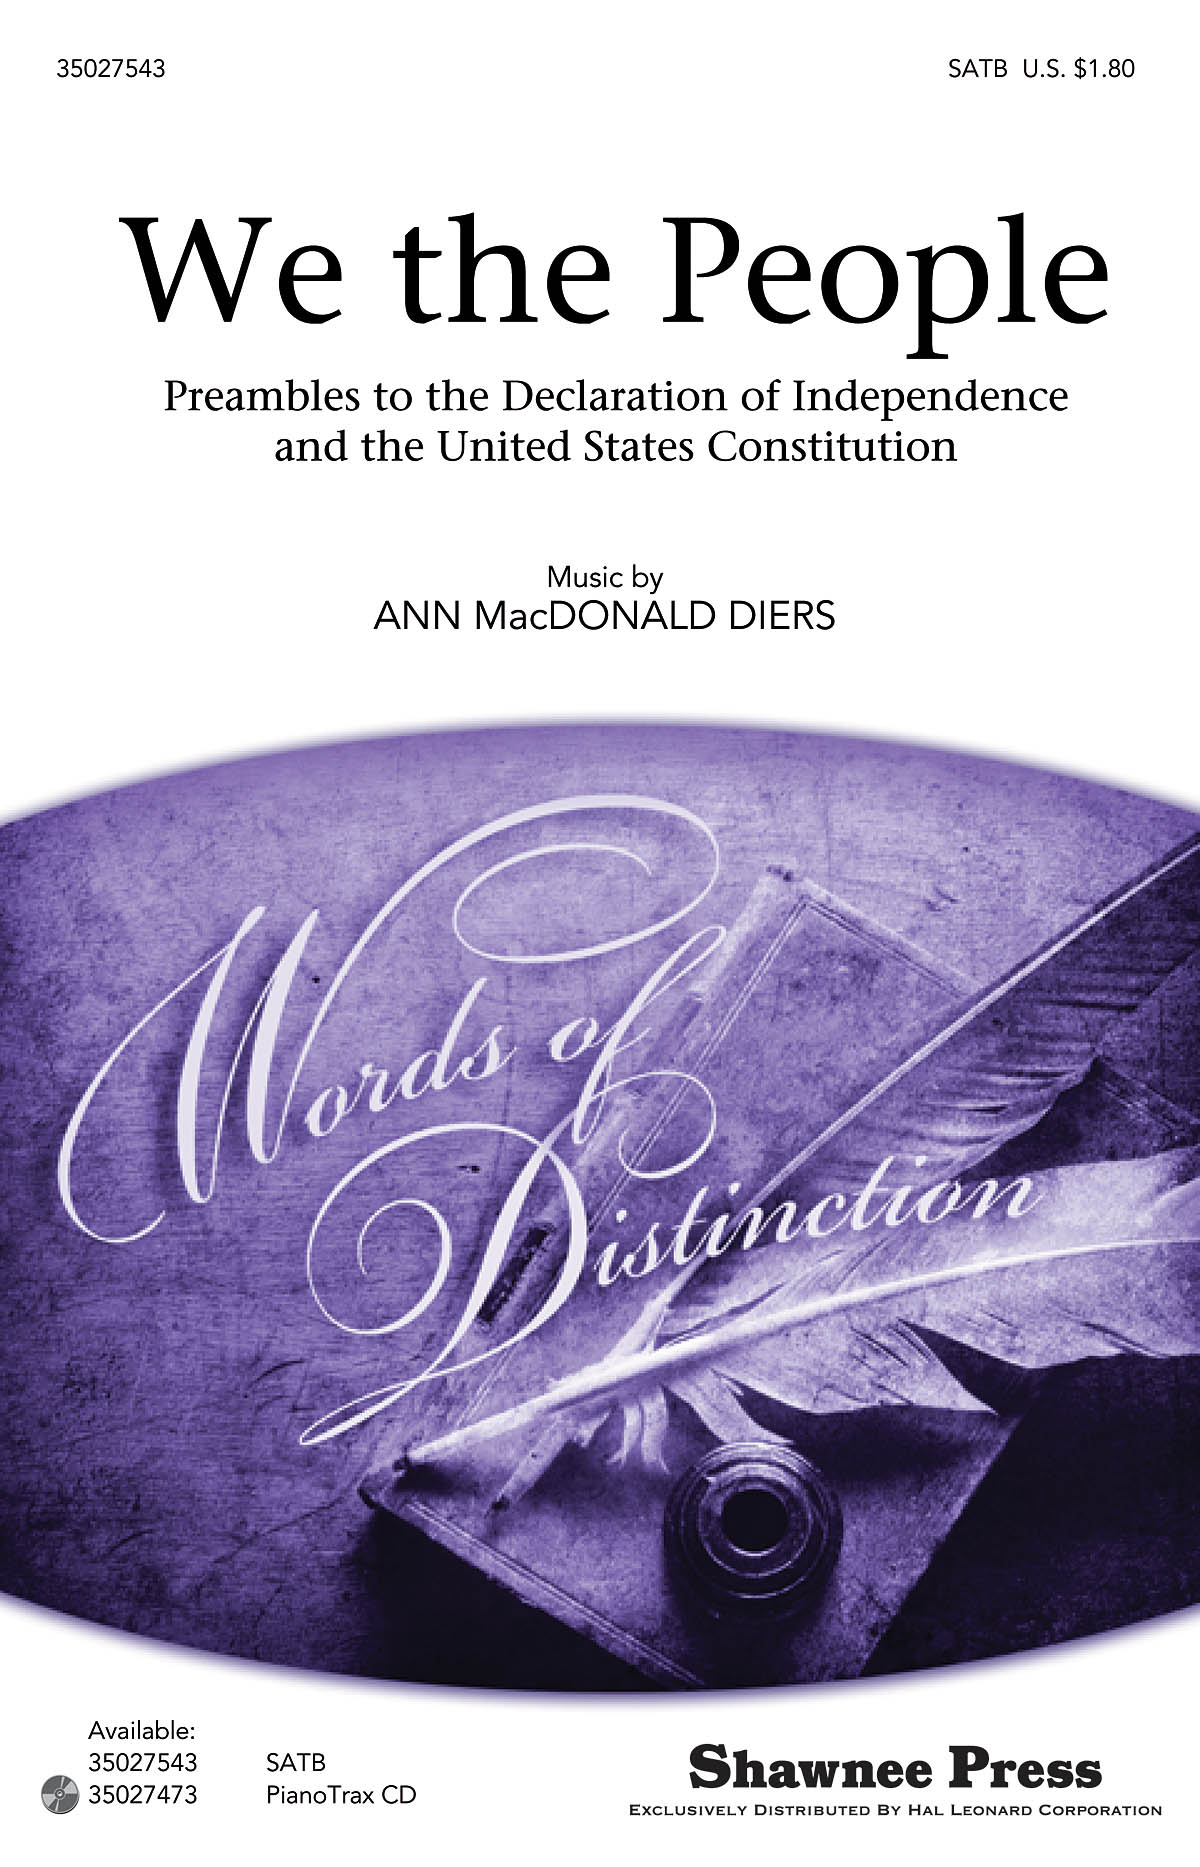 Ann Macdonald Diers: We the People: SATB: Vocal Score